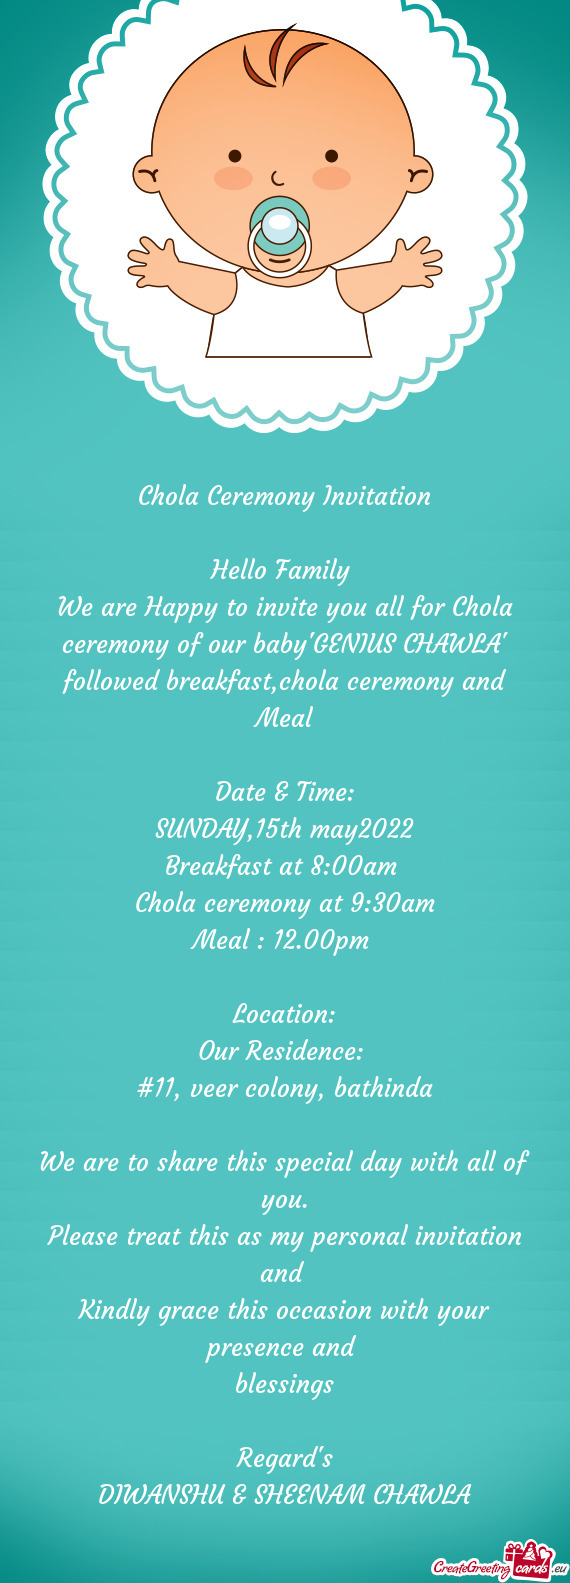 We are Happy to invite you all for Chola ceremony of our baby"GENIUS CHAWLA" followed breakfast,chol